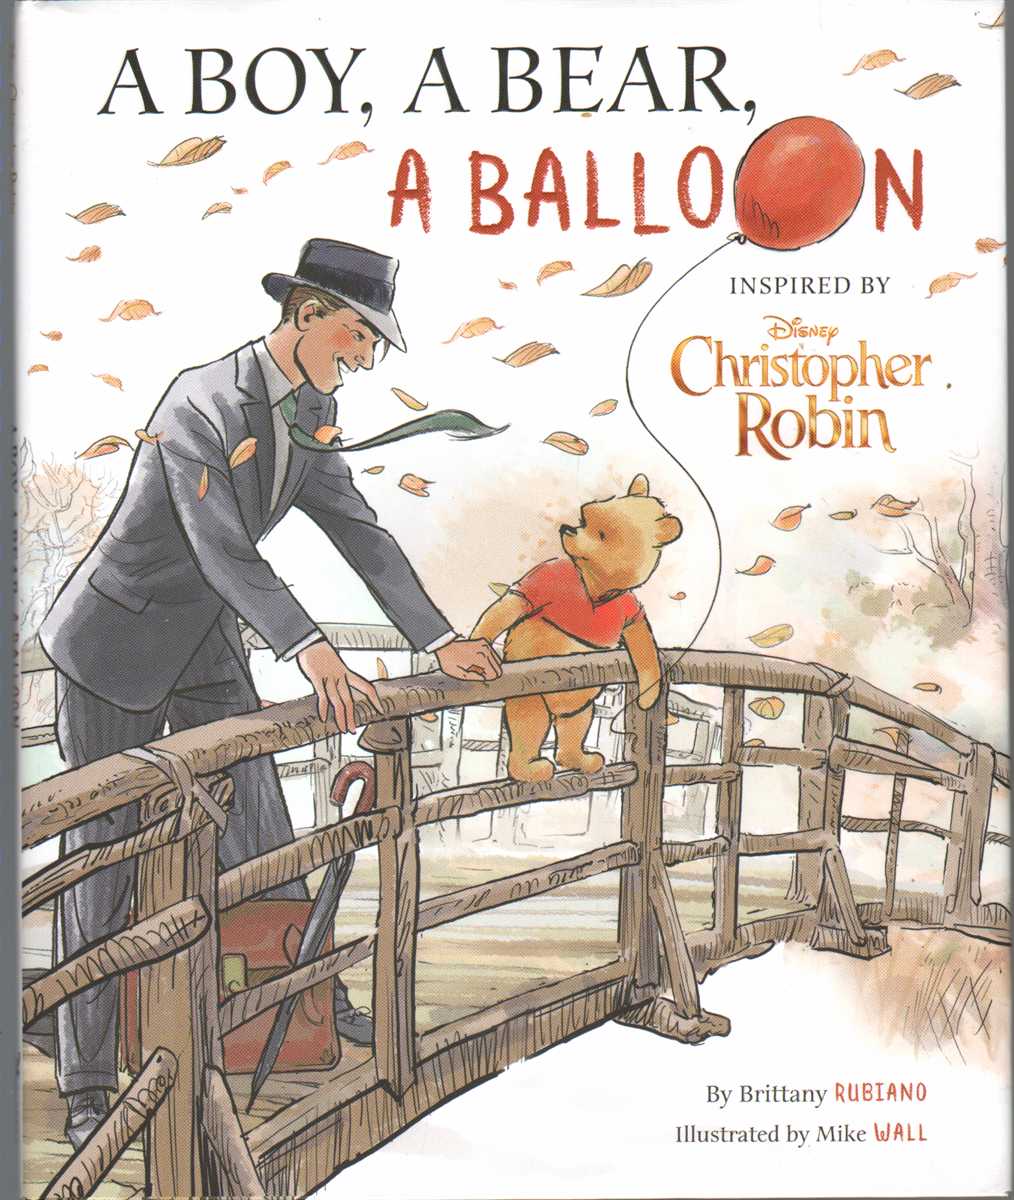 Rubiano, Brittany & Mike Wall - CHRISTOPHER ROBIN A Boy, a Bear, a Balloon